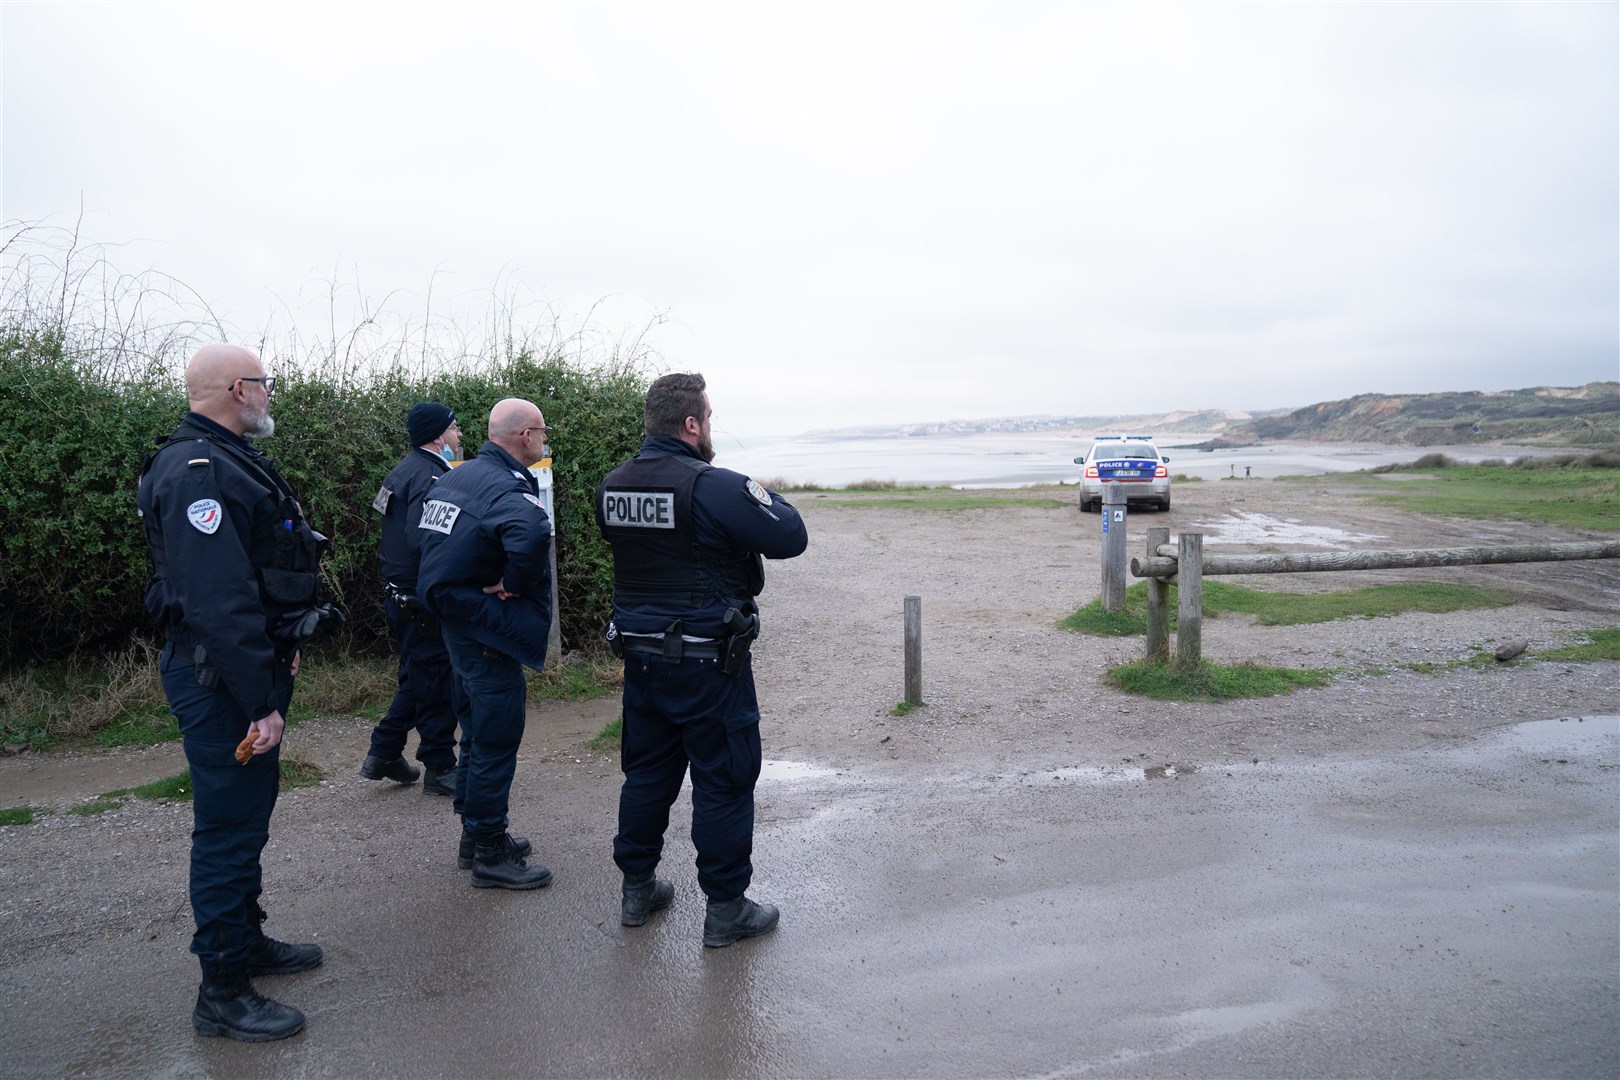 French police look out over a beach near Wimereux believed to be used by migrants trying to get to the UK (Stefan Rousseau/PA)